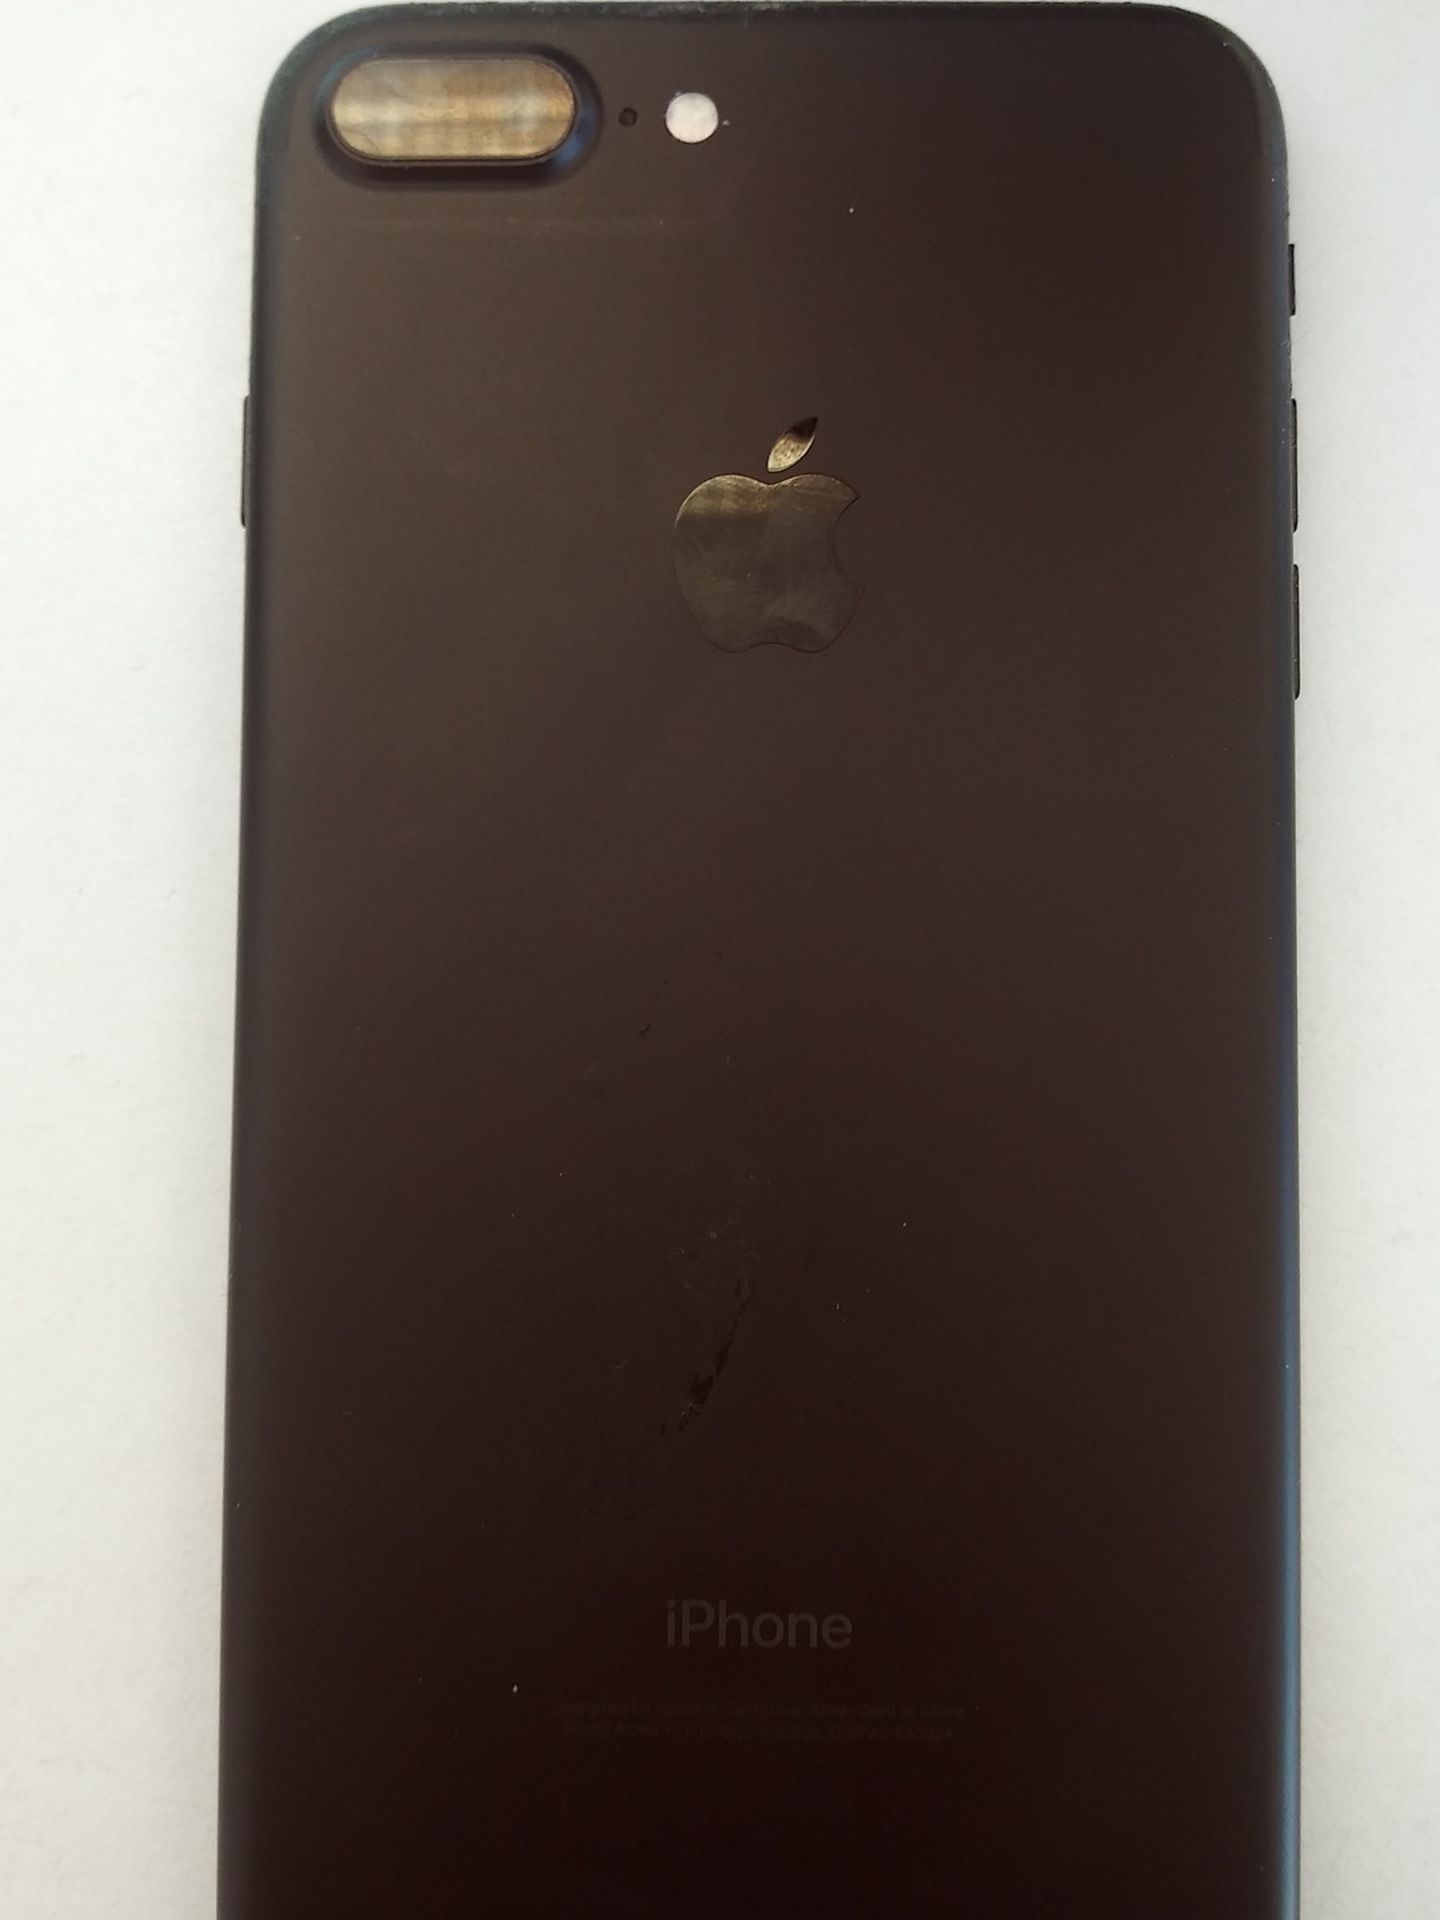 🍎 iPhone 7 PLUS 128 GB (Jet Black) $215 OBO **UNLOCKED FOR AT&T OR CRICKET!